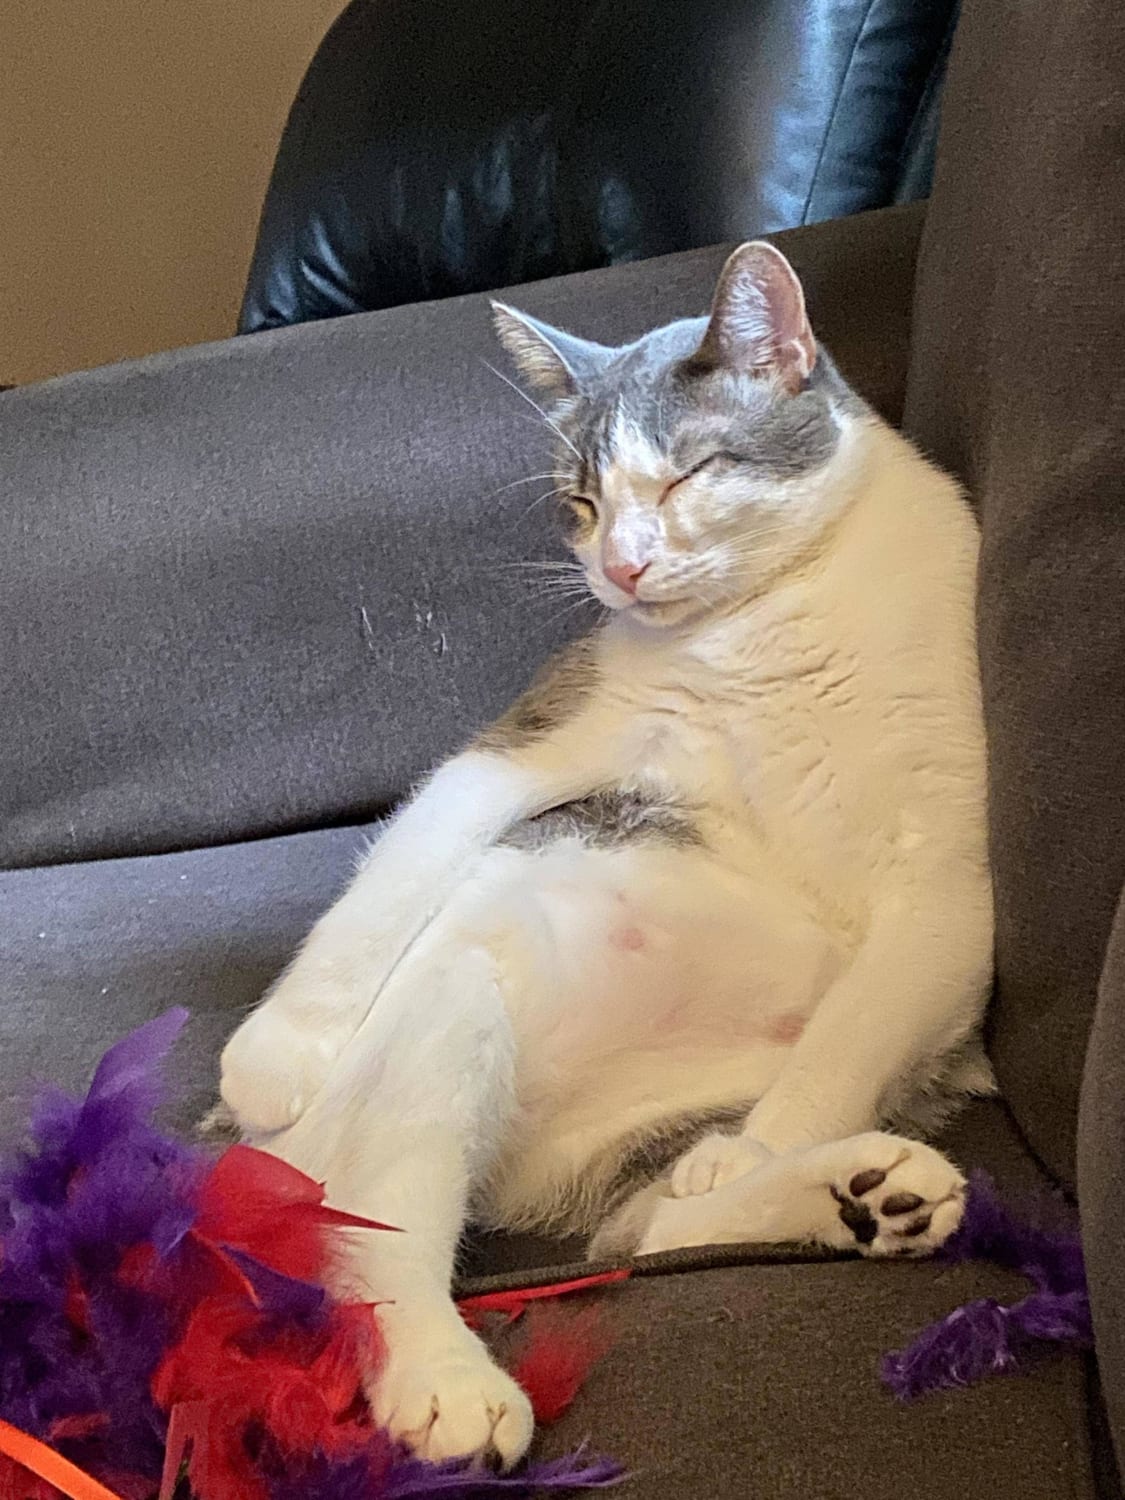 Just adopted this chonker from our local shelter, he seems to be adjusting well…